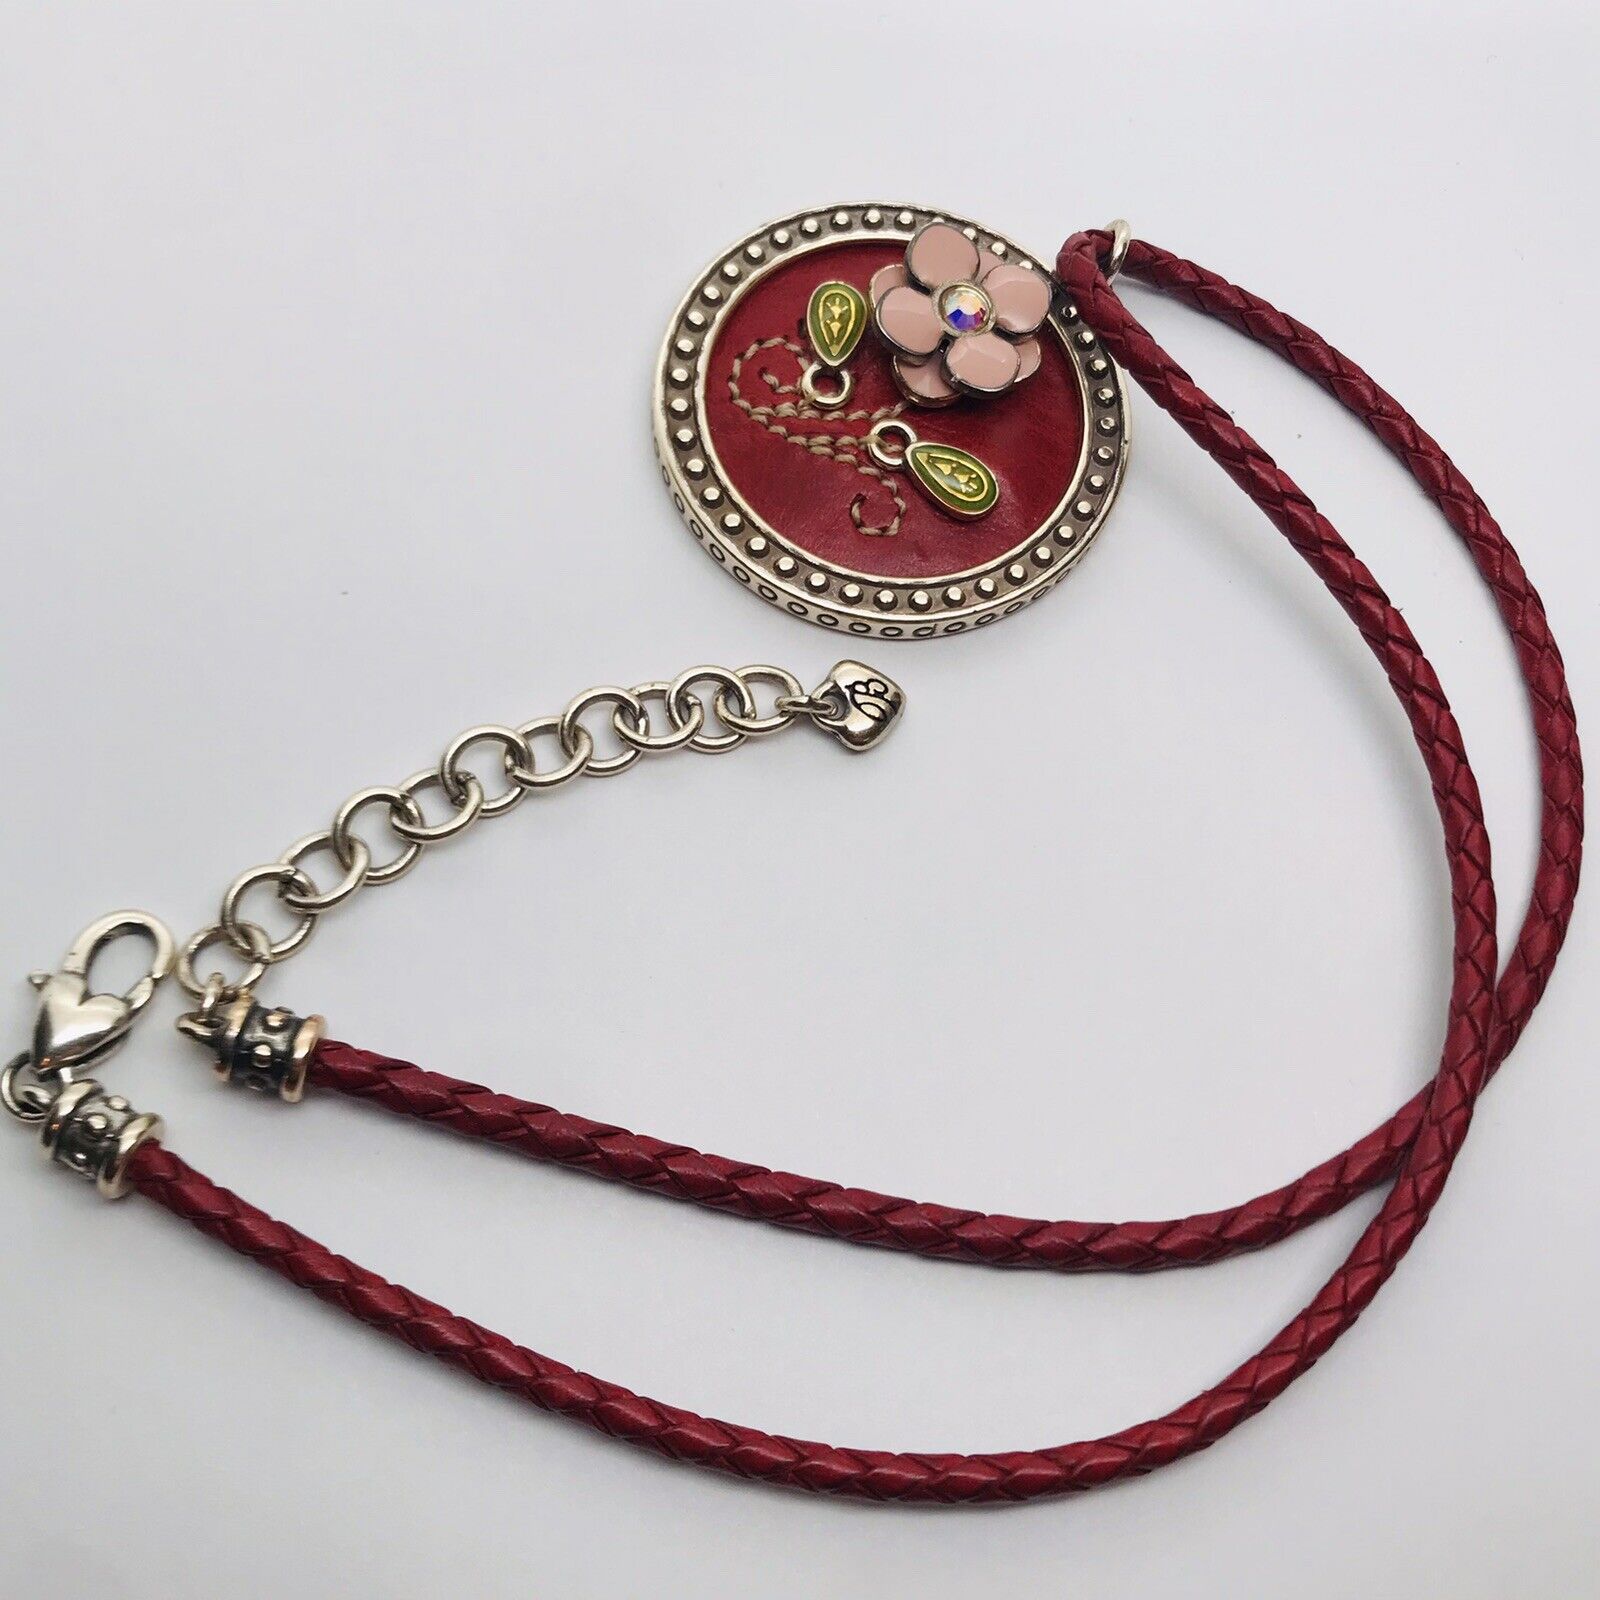 RETIRED BRIGHTON RED LEATHER FLOWER NECKLACE ADJUSTABLE CIRCLE SWIRL